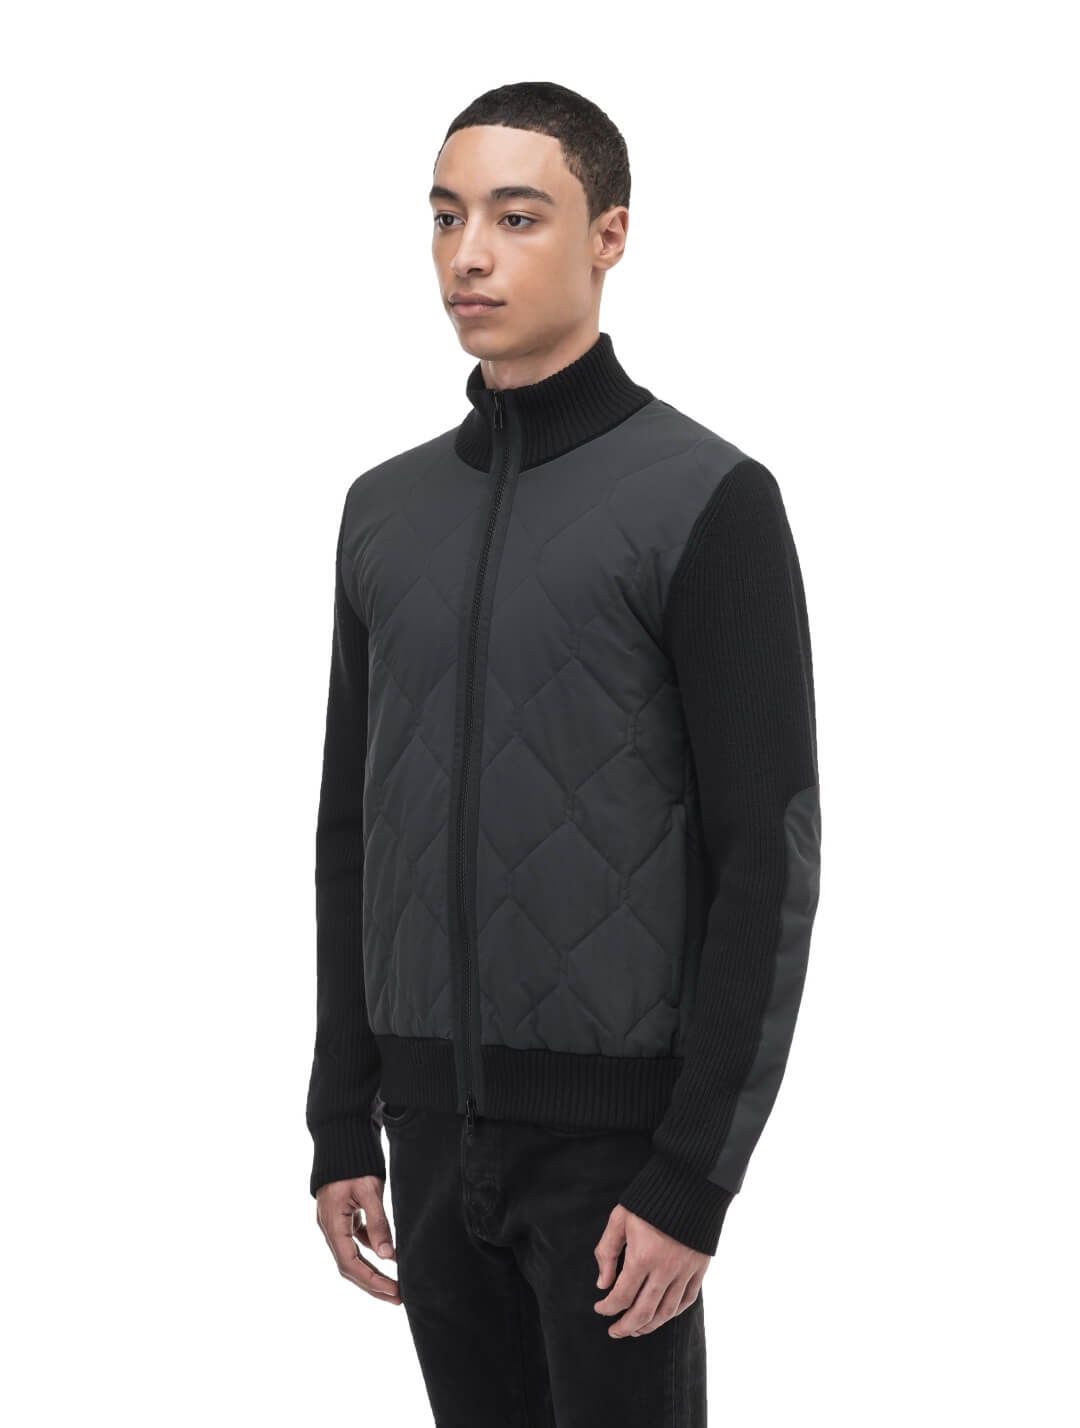 Ero Men's Tailored Hybrid Sweater in hip length, PrimaLoft Gold Insulation Active+, Durable 4-Way Stretch Weave quilted torso, Merino wool knit collar, sleeves, back, and cuffs, two-way front zipper, and hidden waist pockets, in Black